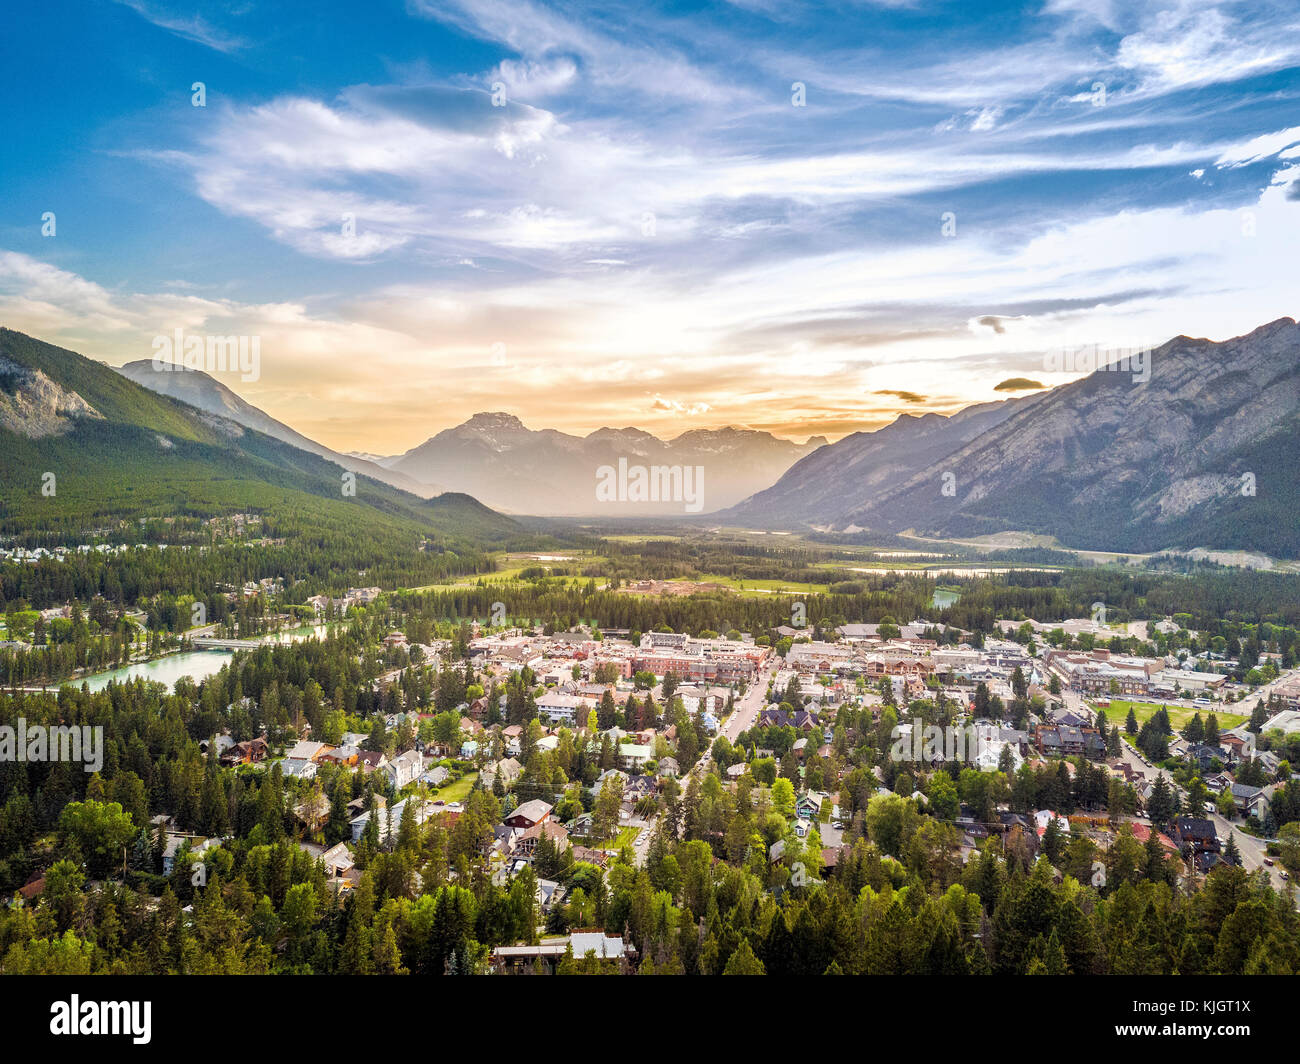 Amazing cityscape of Banff in canadian Rocky Mountains, Alberta,Canada Stock Photo